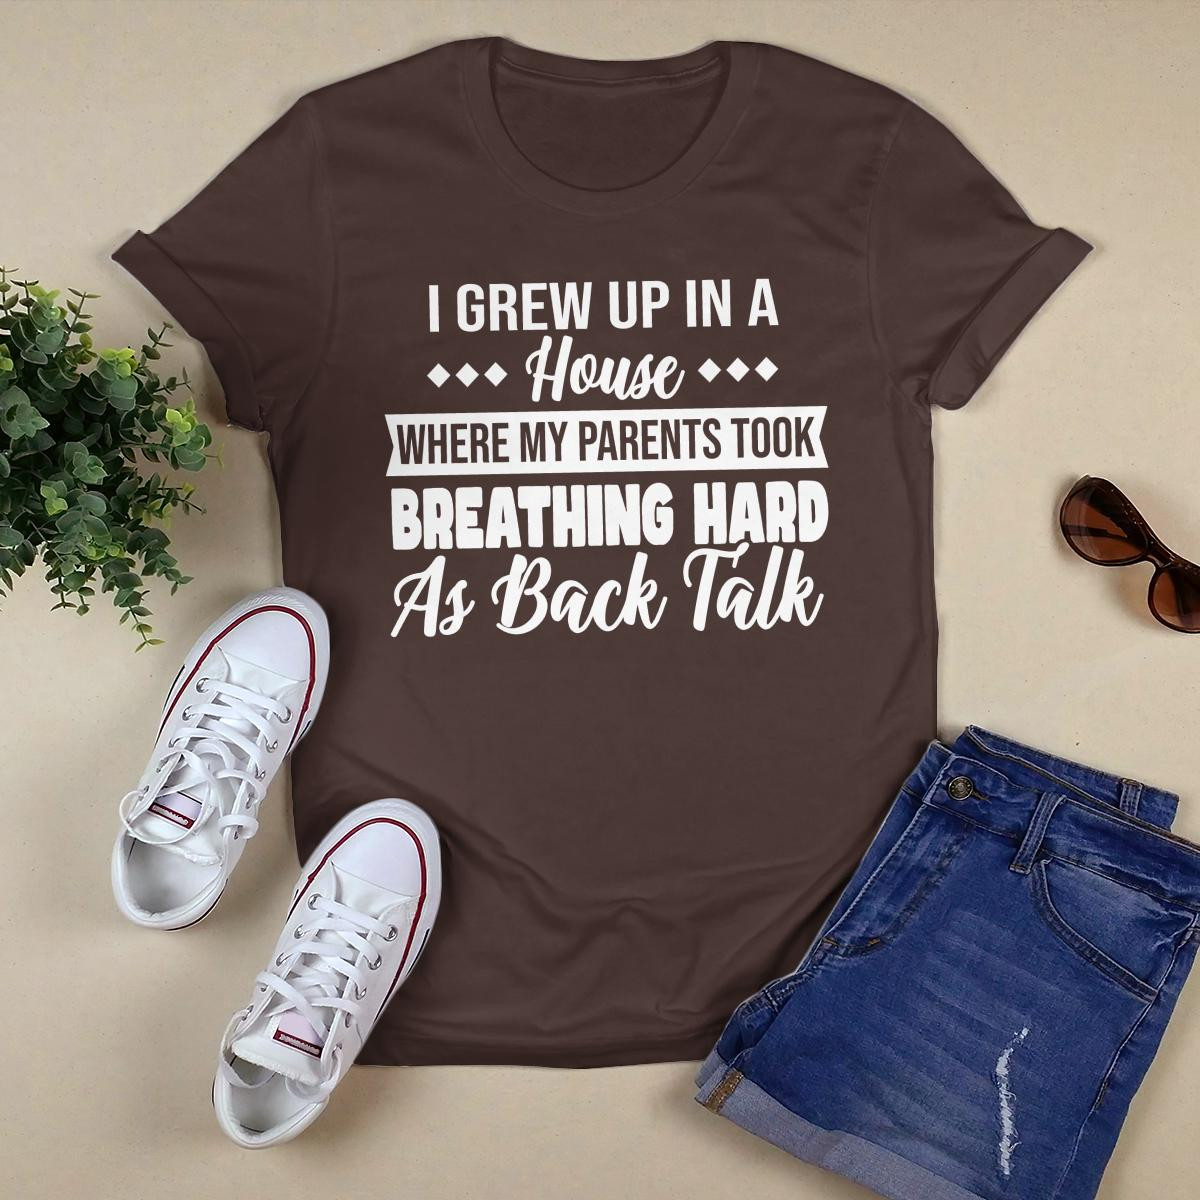 I Grew Up In A House shirt